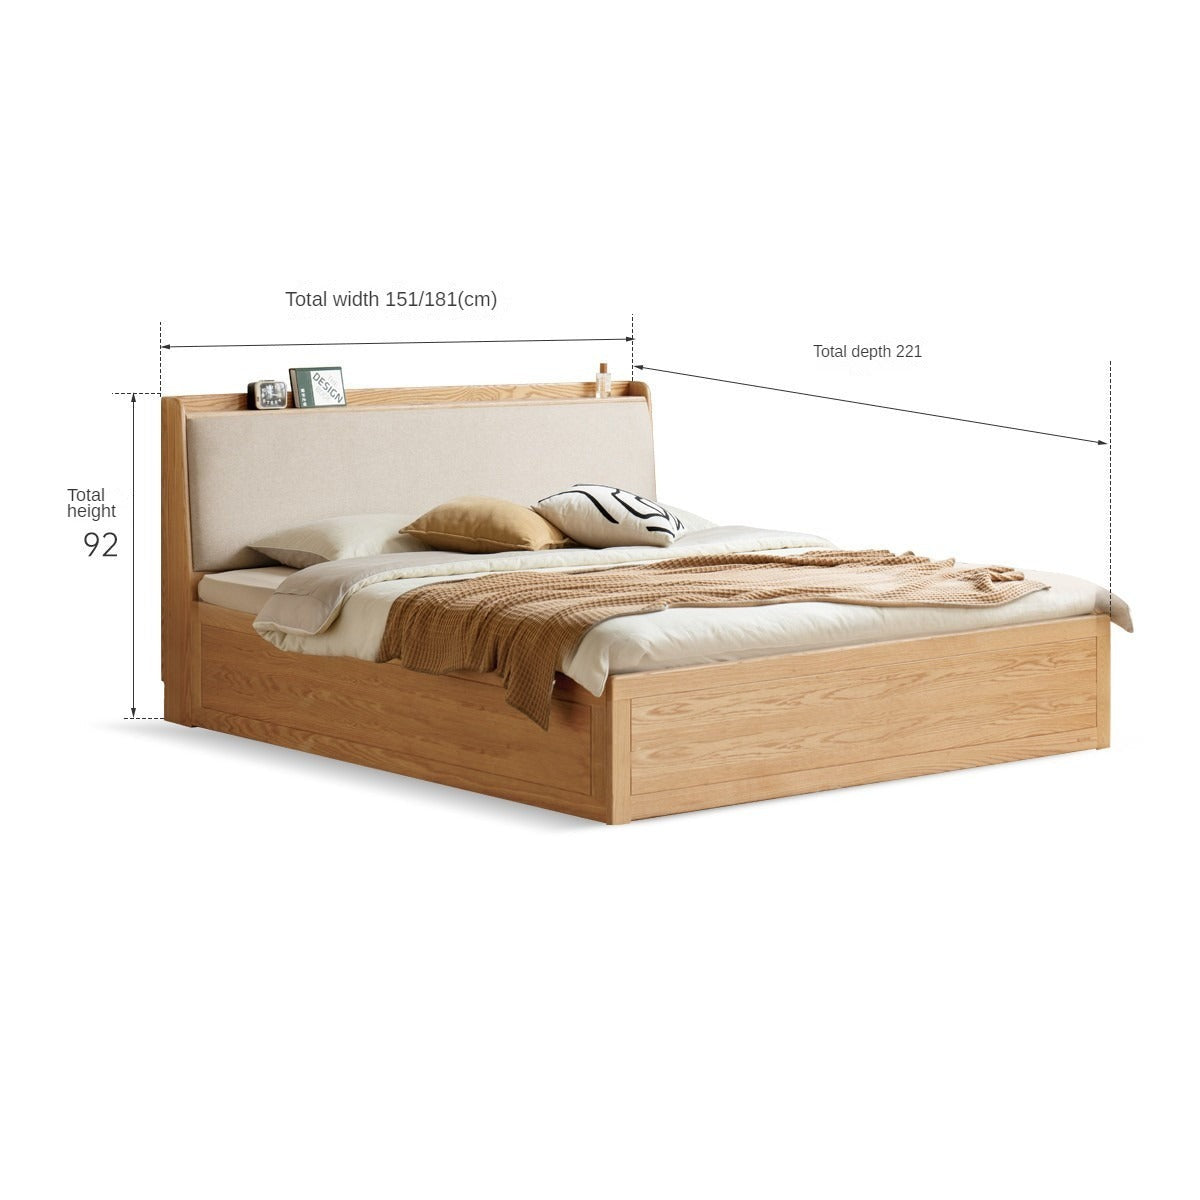 Oak Solid Wood Box Bed Storage Bed technology cloth, fabric"